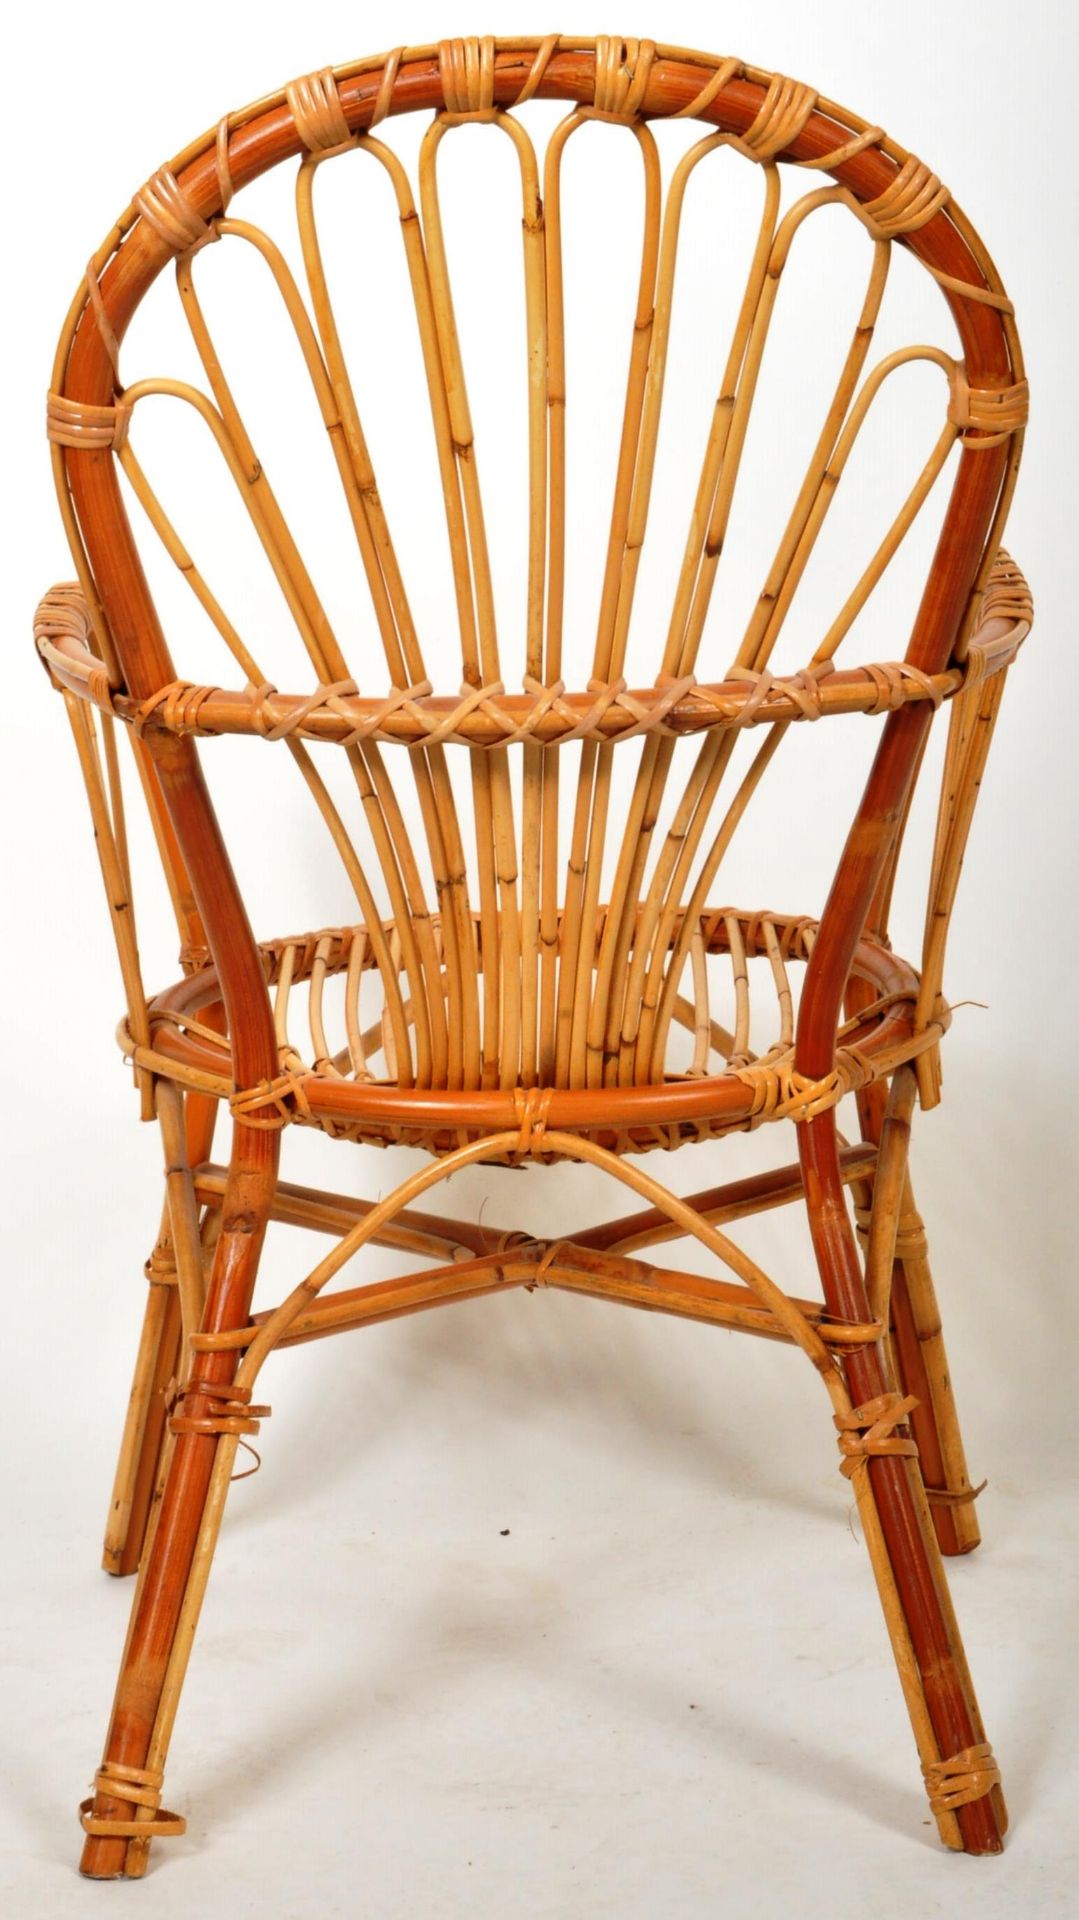 MID 20TH CENTURY ITALIAN BAMBOO AND WICKER / CANE ARMCHAIR - Image 5 of 5